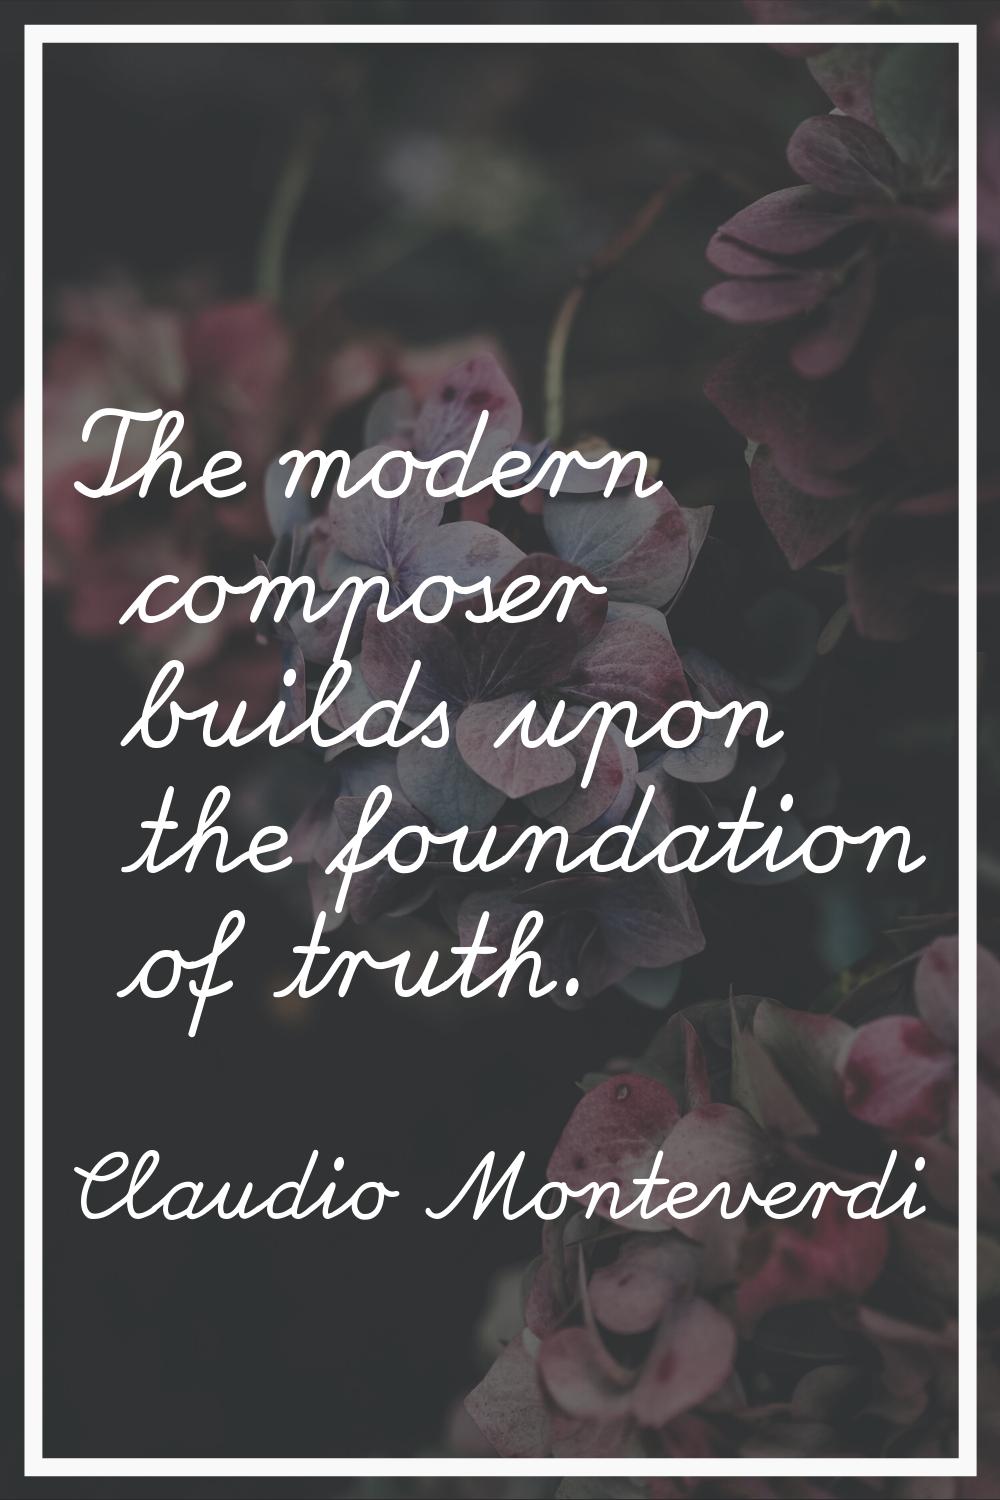 The modern composer builds upon the foundation of truth.